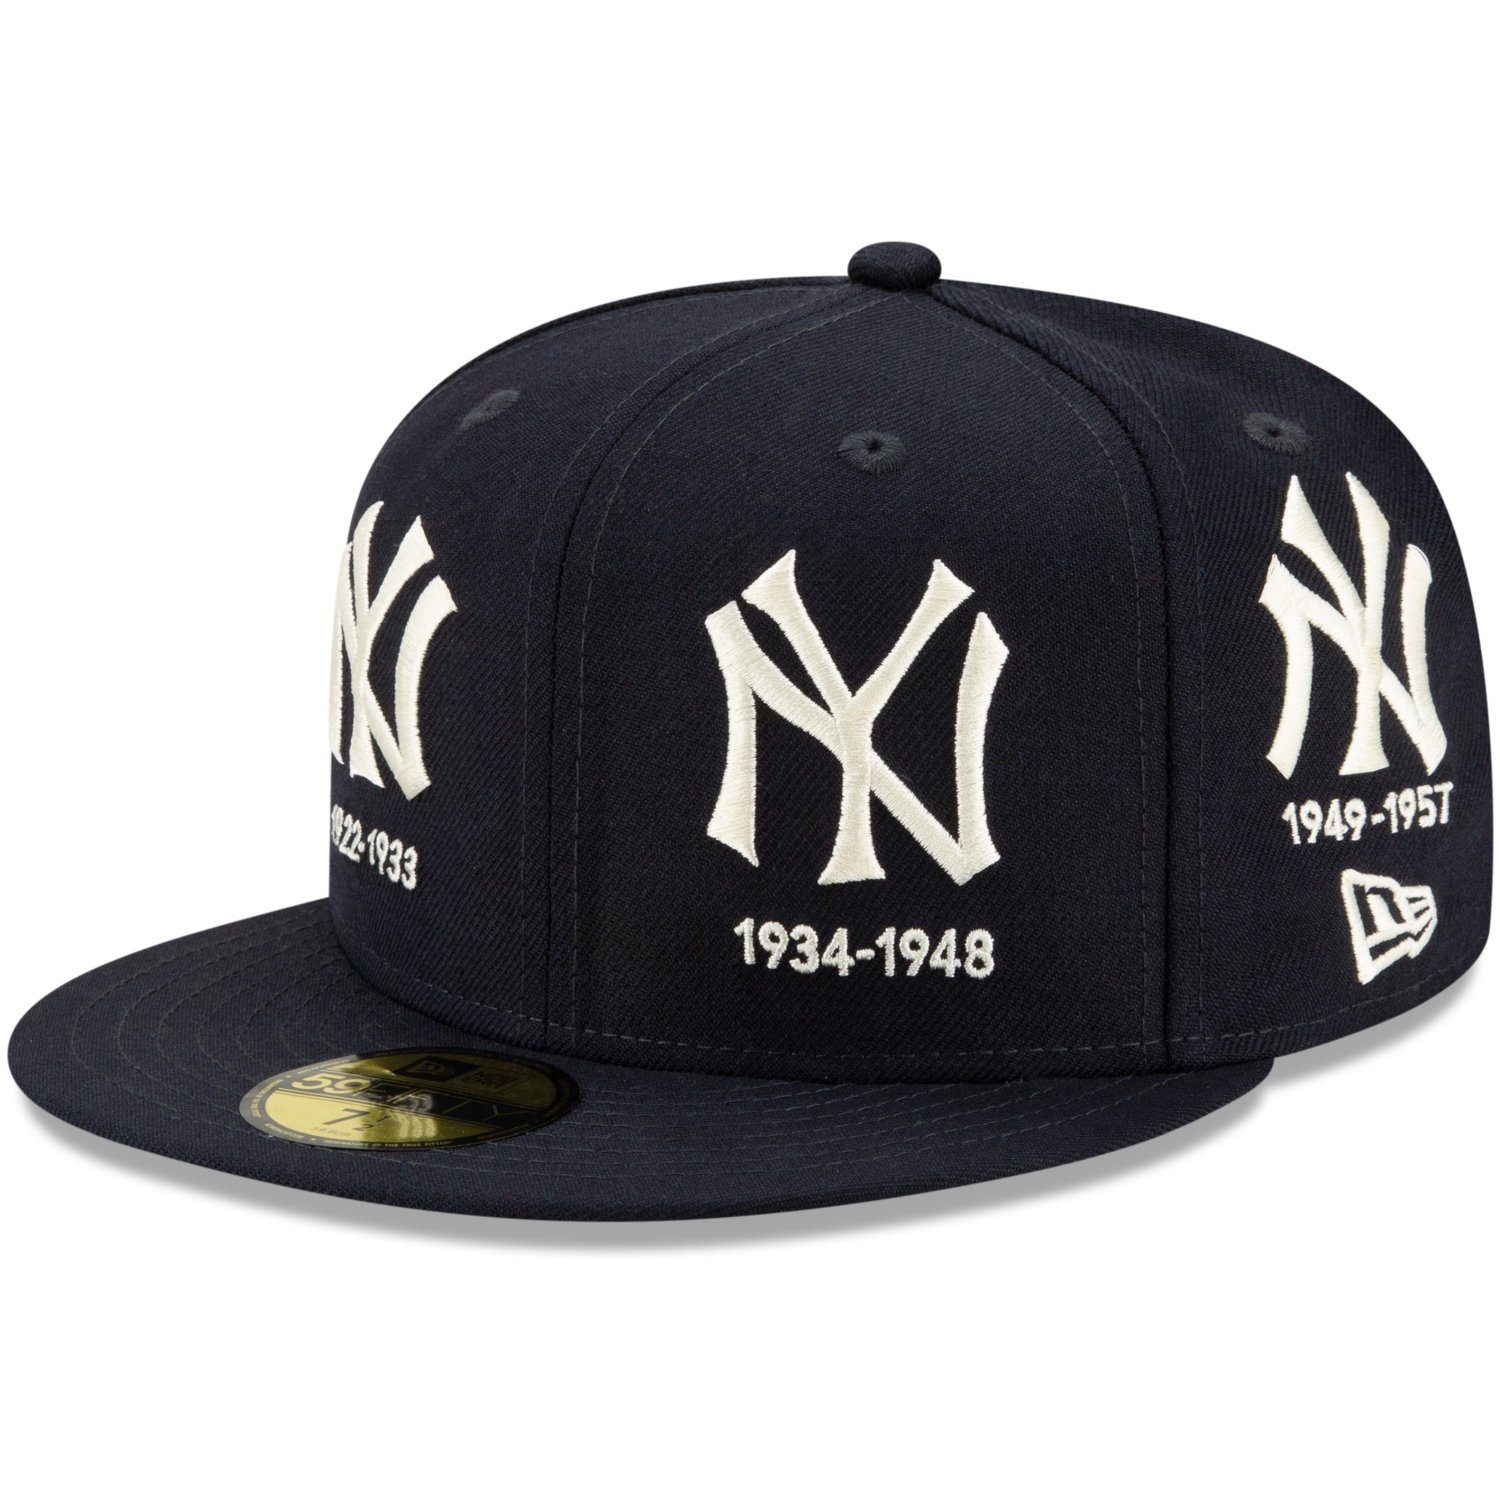 New Era Fitted Cap 59Fifty COOPERSTOWN New York Yankees